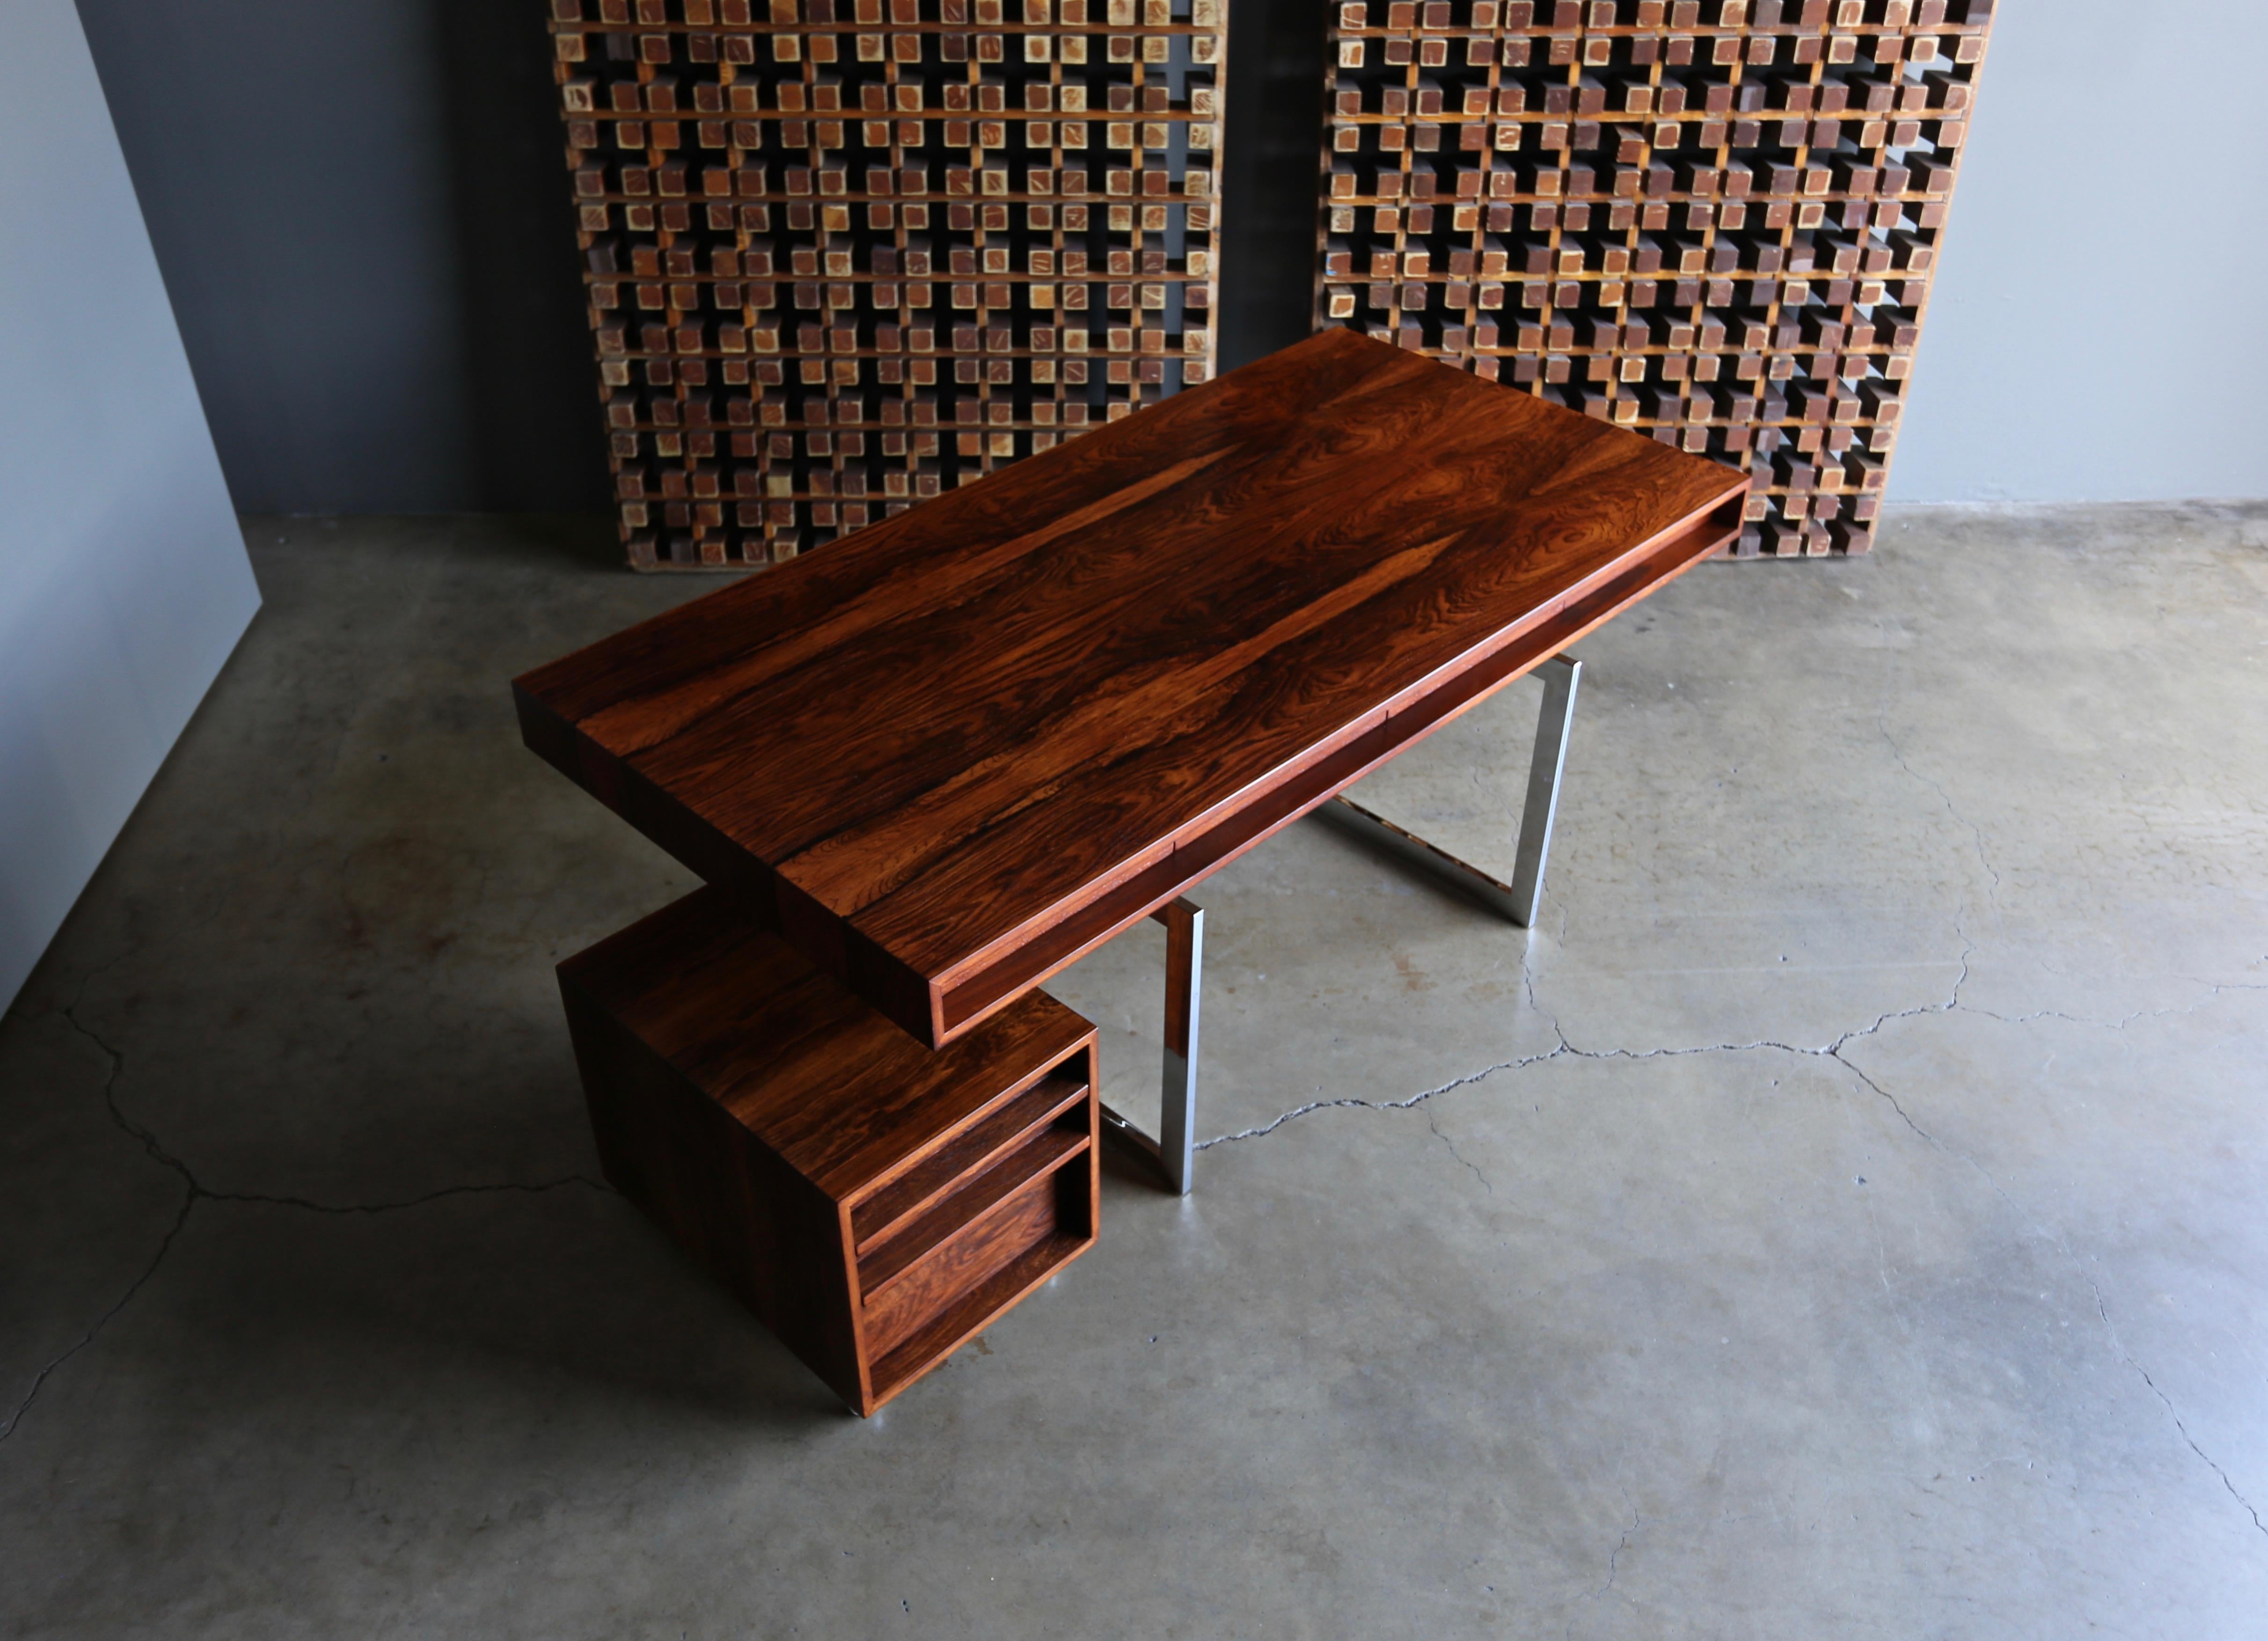 Bodil Kjaer rosewood desk for E. Pederson and Sons A/S, circa 1959. This desk retains its original key. The rolling chest of drawers pictured is included. This piece has been professionally restored. 

The desk measures: 72 7/16